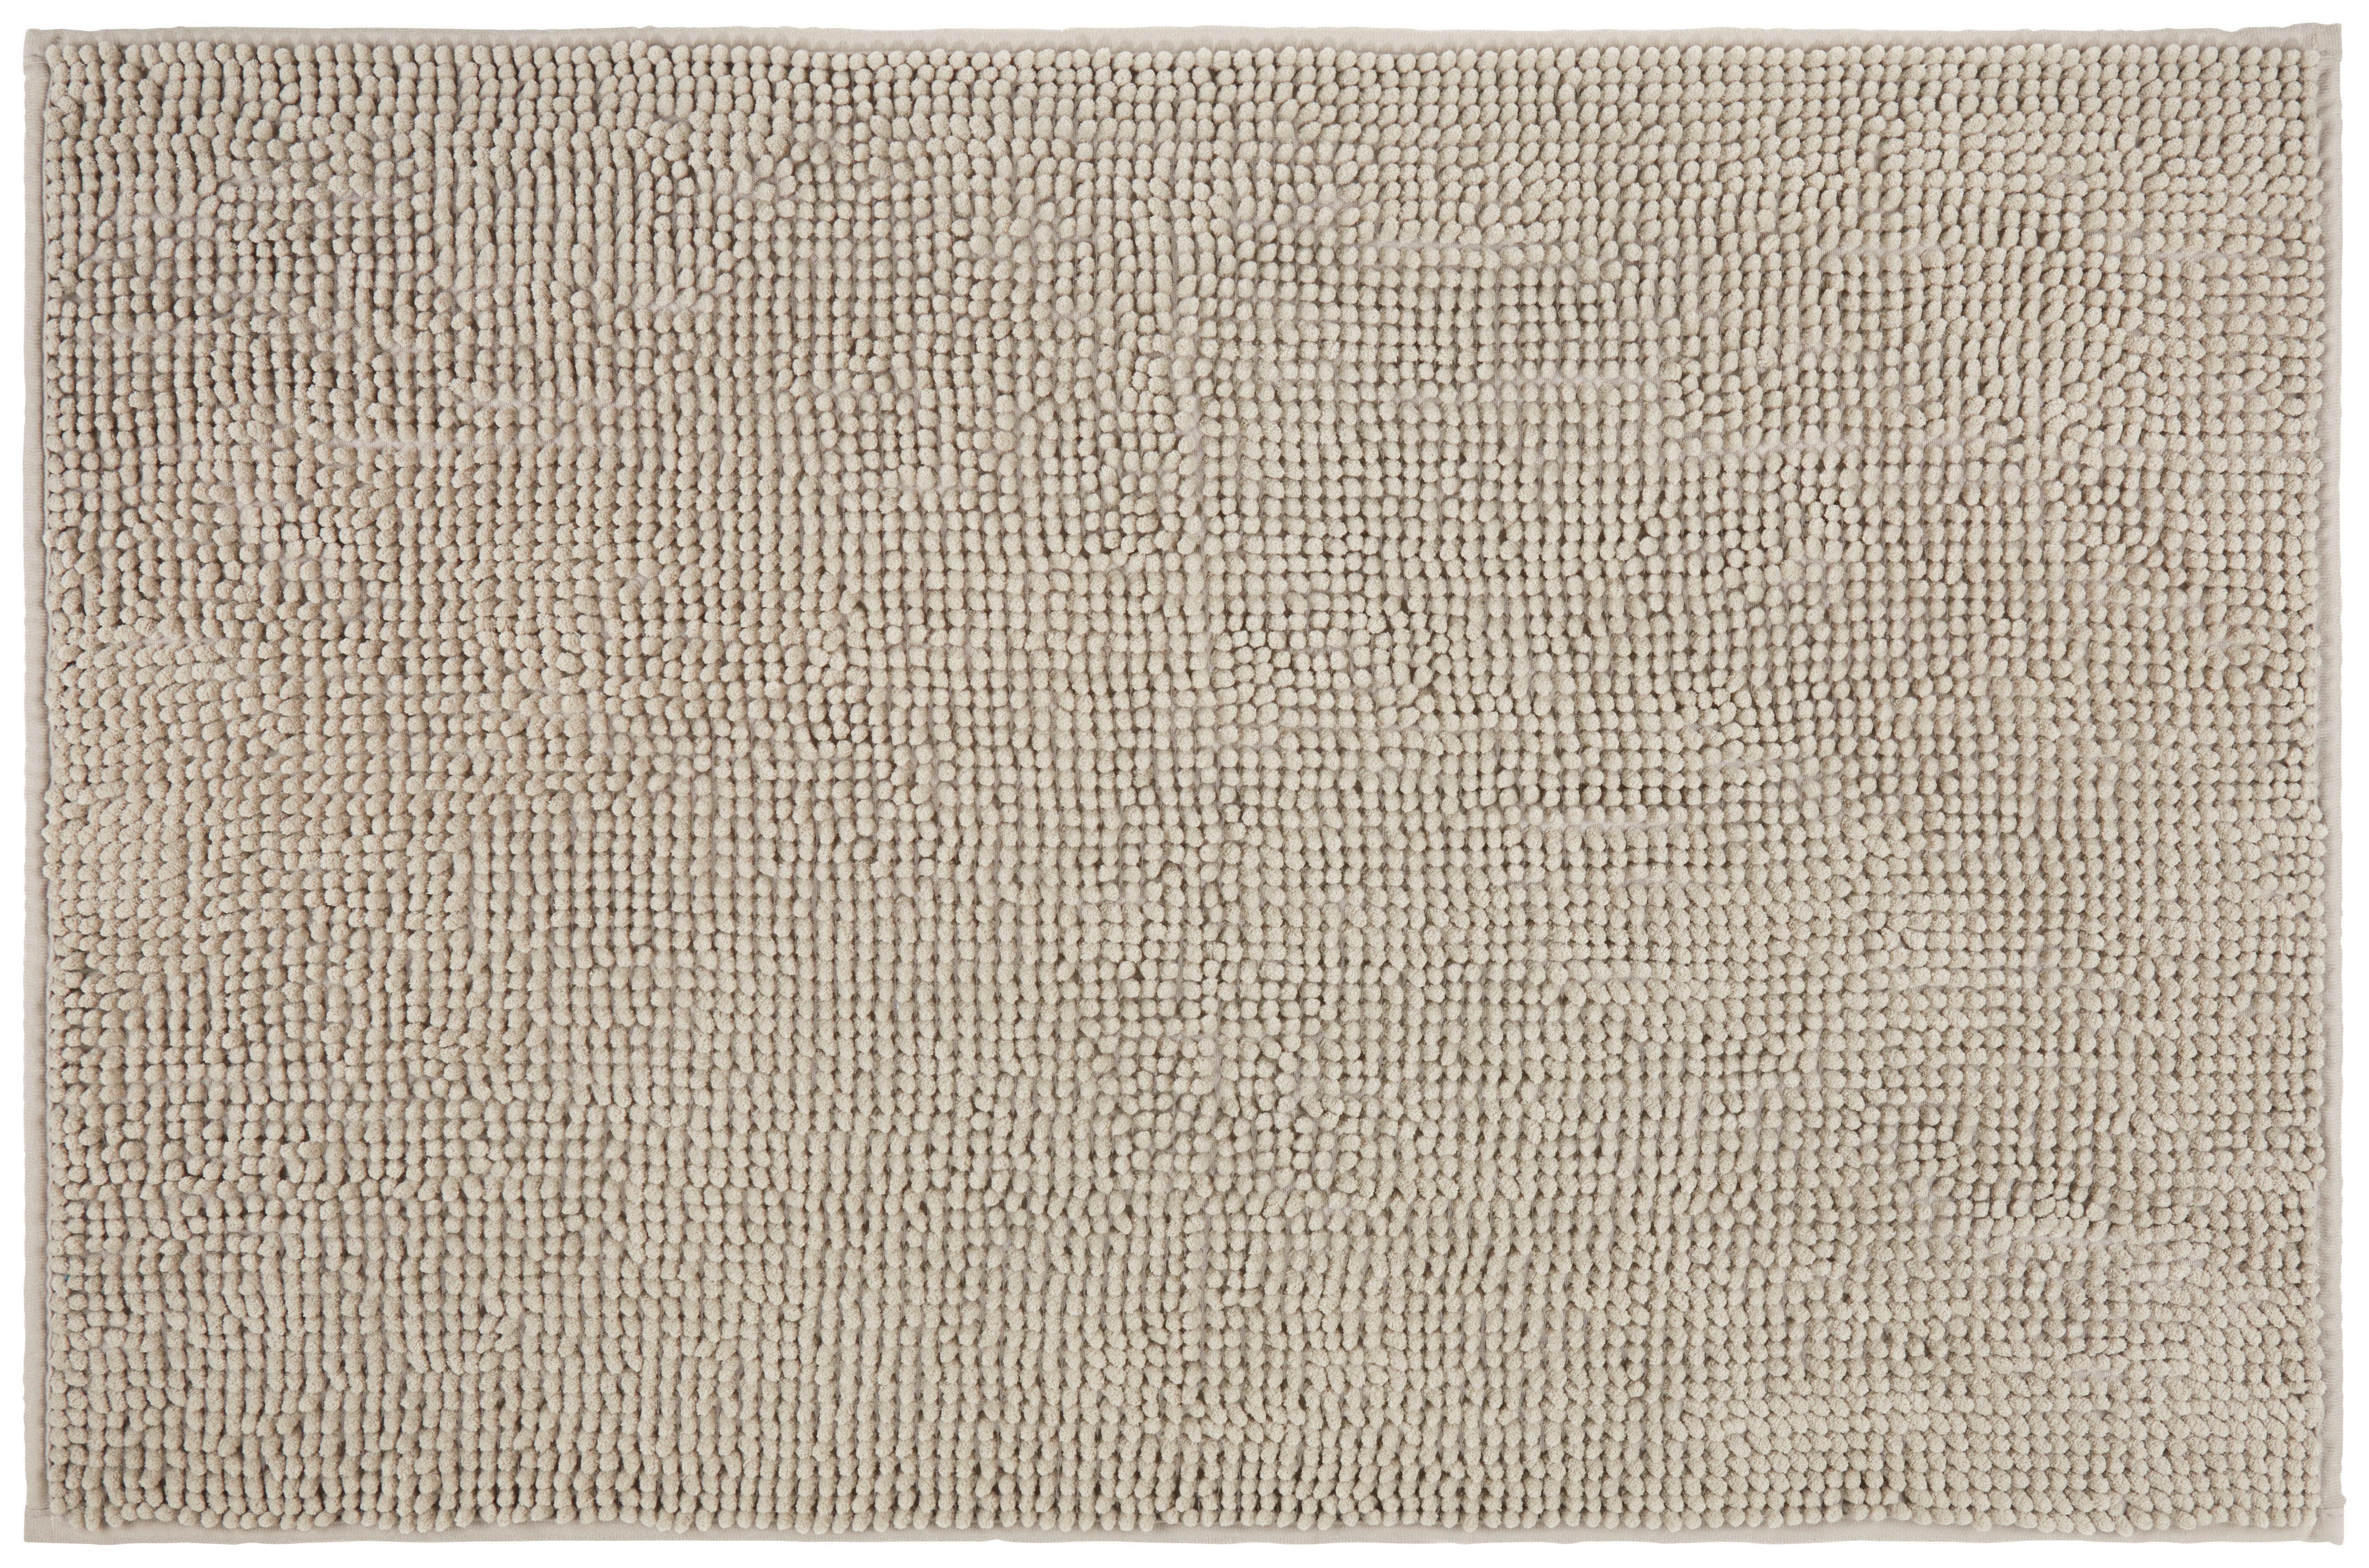 Badematte Nelly in Taupe ca. 60x90cm - Taupe, Textil (60/90cm) - Modern Living